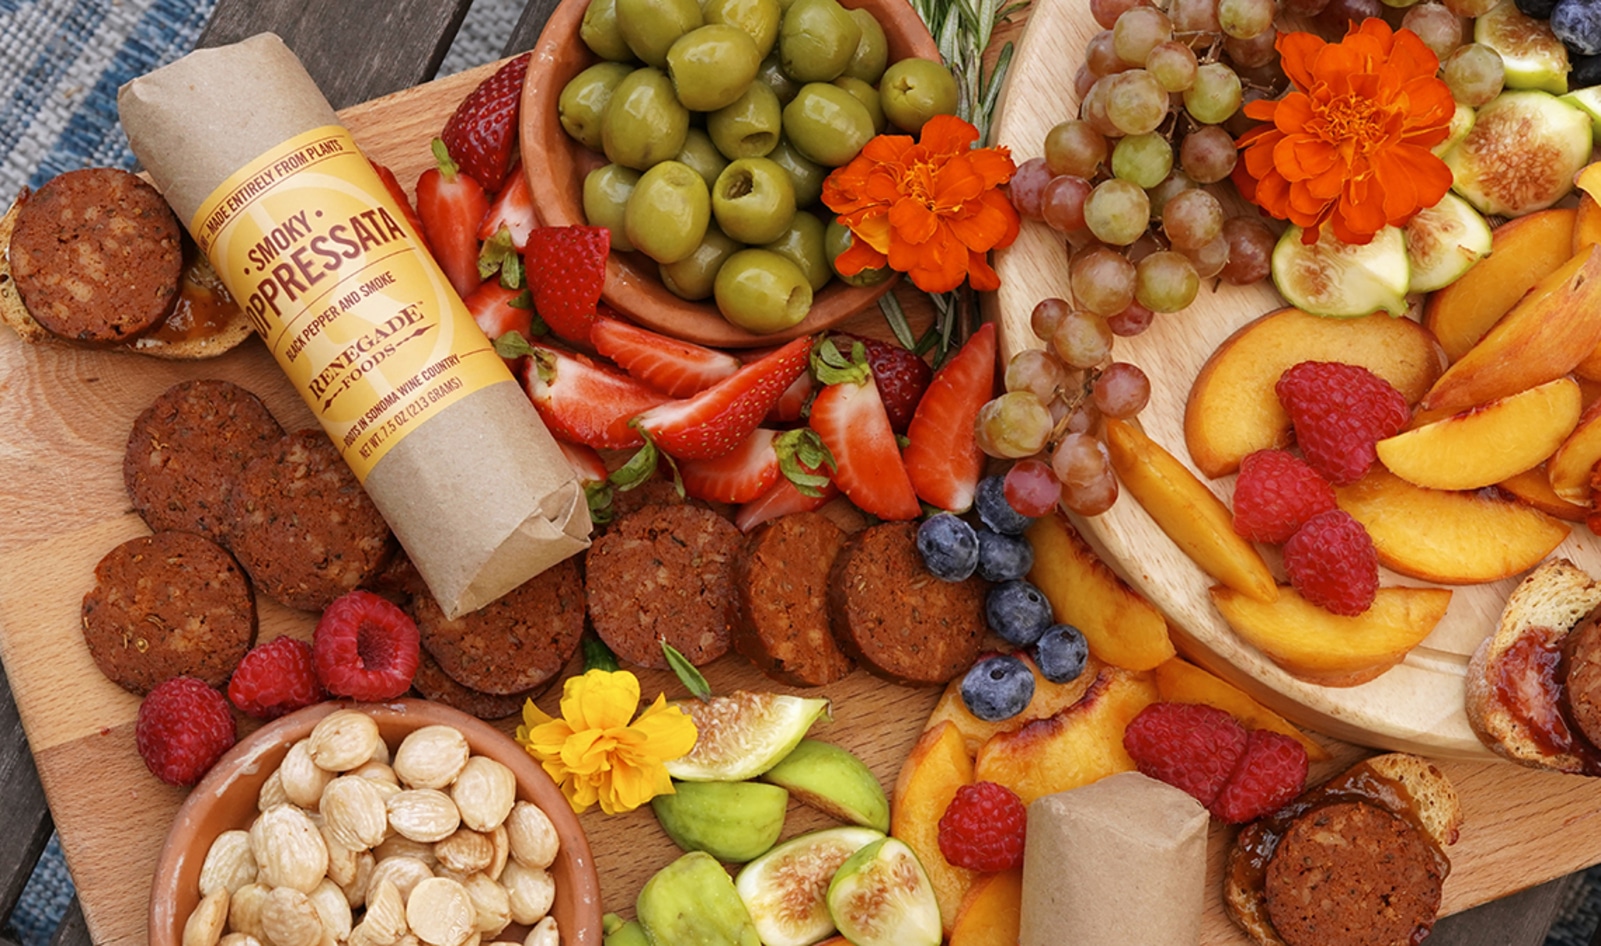 Want to Make an Instagram-Worthy Vegan Charcuterie Board? These Brands Can Help.